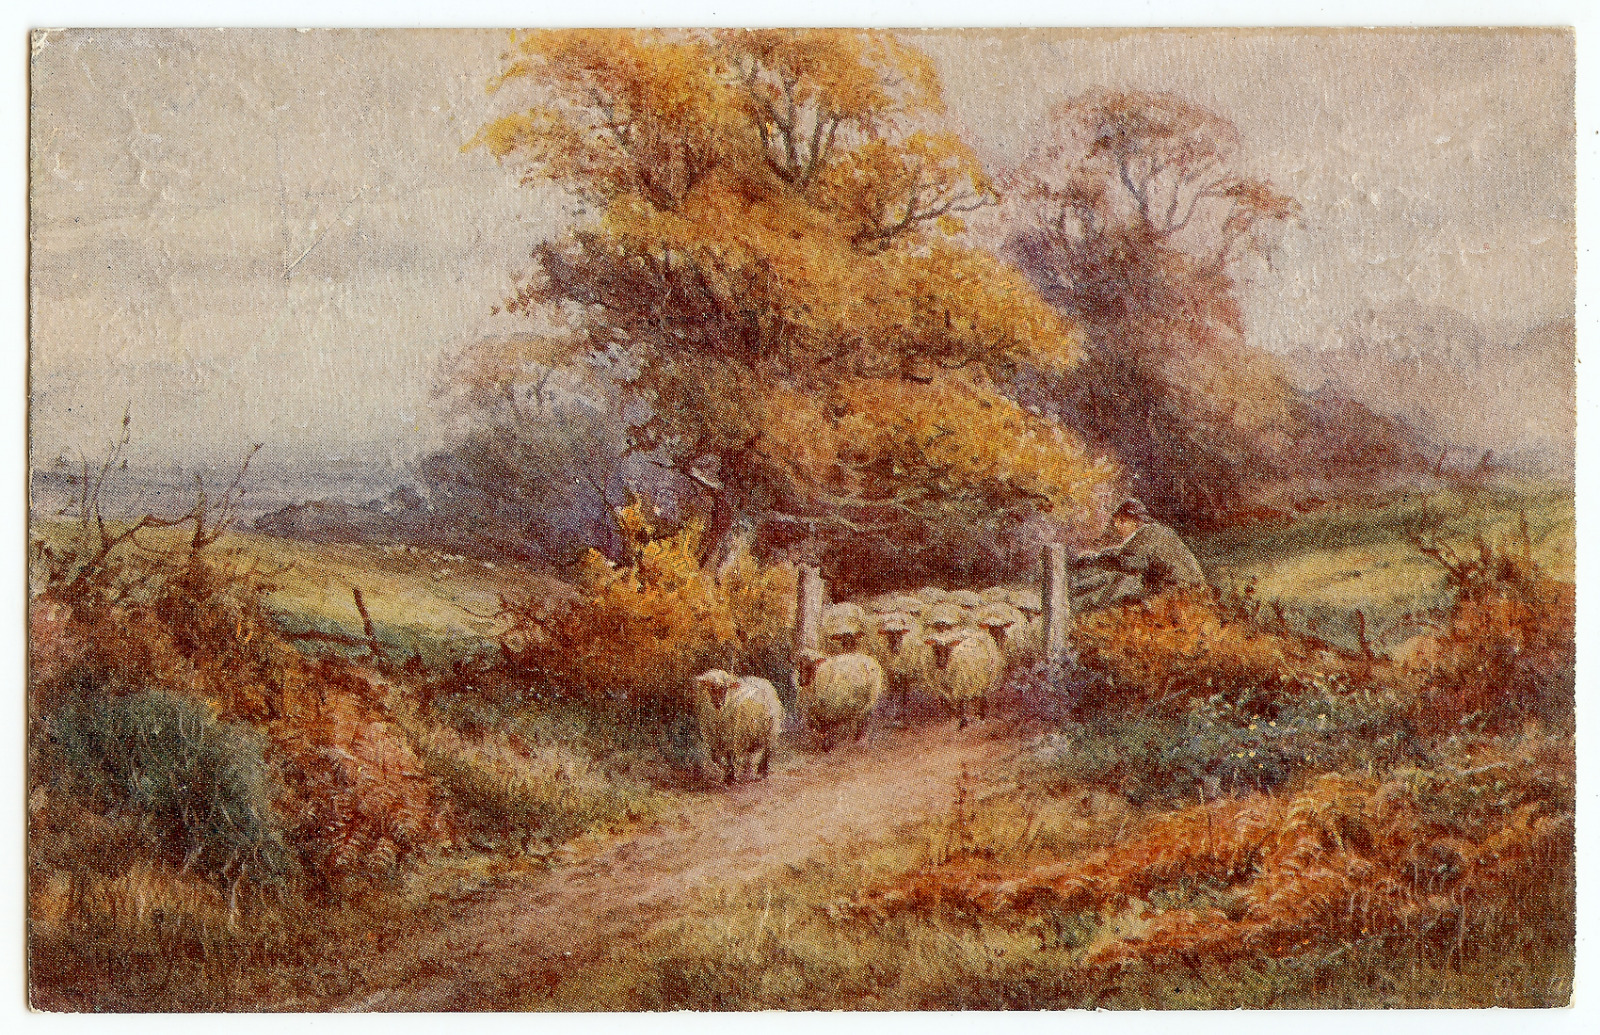 ANTIQUE TUCK'S OILETTE THE COUNTRY SIDE SHEEP POSTCARD NO 2360 STANNARD UNPOSTED